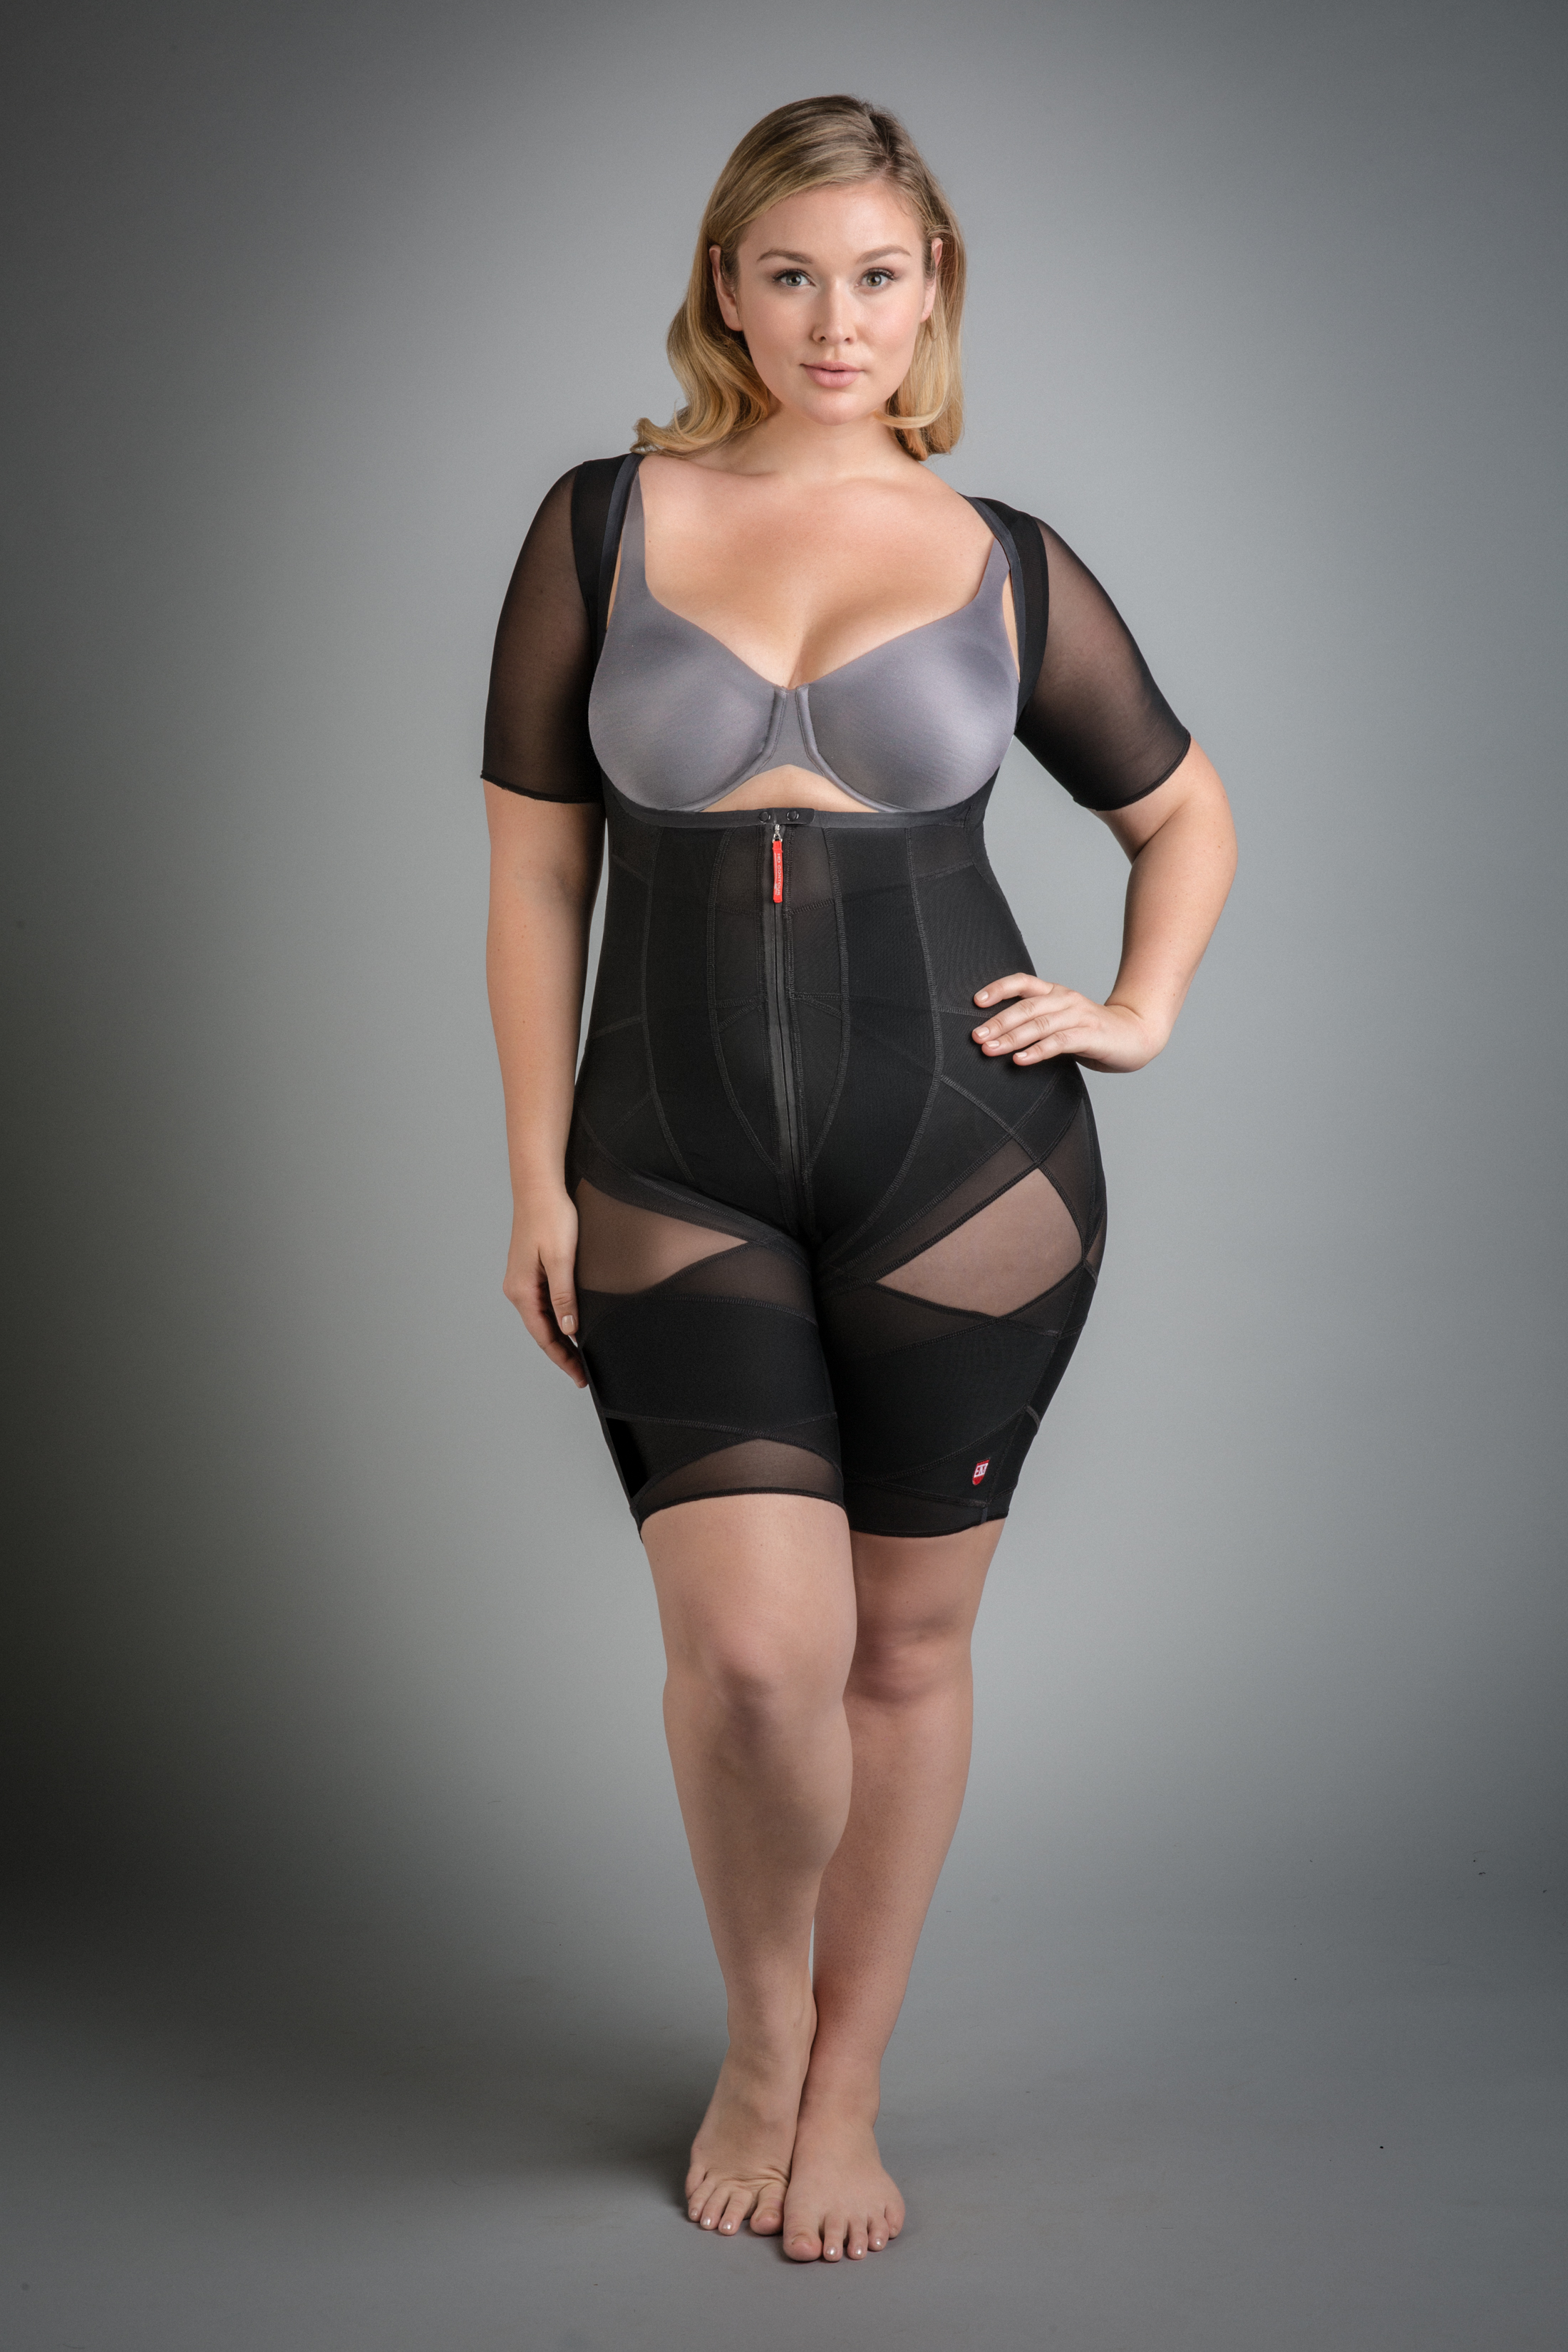 Plus Size Full Body Shapewear - Find The Right HD Full Body For